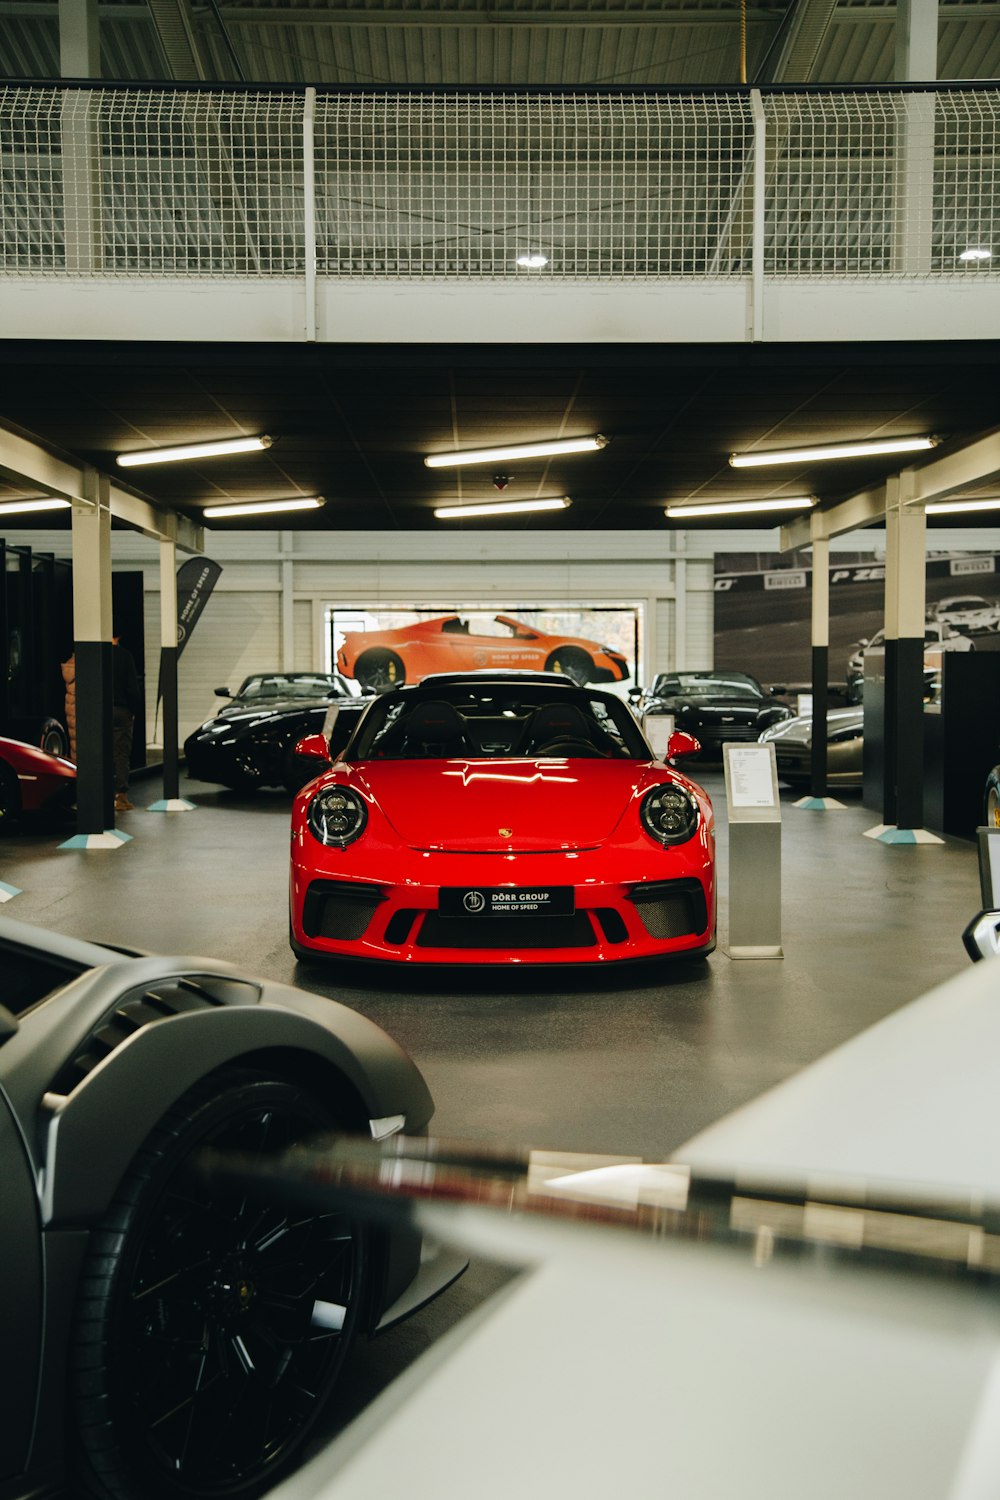 a red sports car parked in a garage